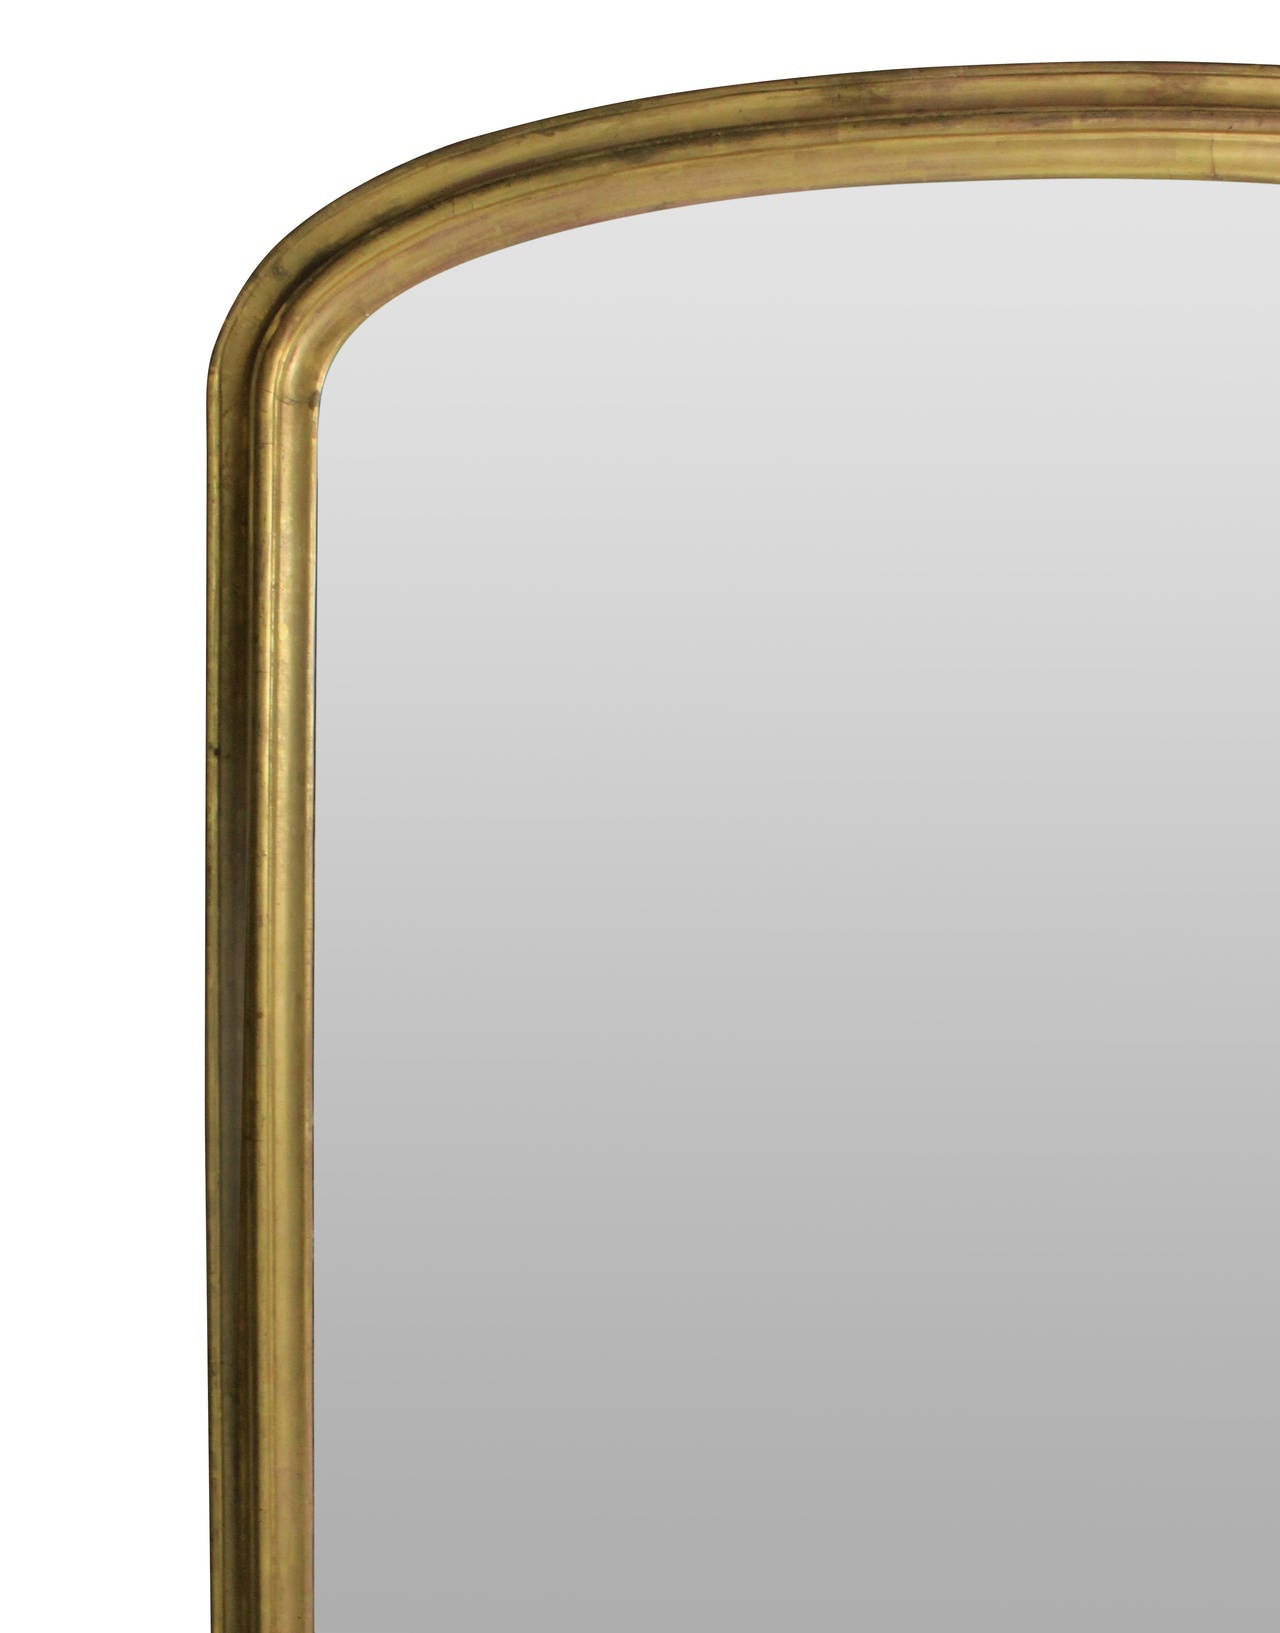 A large French carved and water gilded overmantel mirror with scrolled detailing at the bottom and arched frame. Original plate.